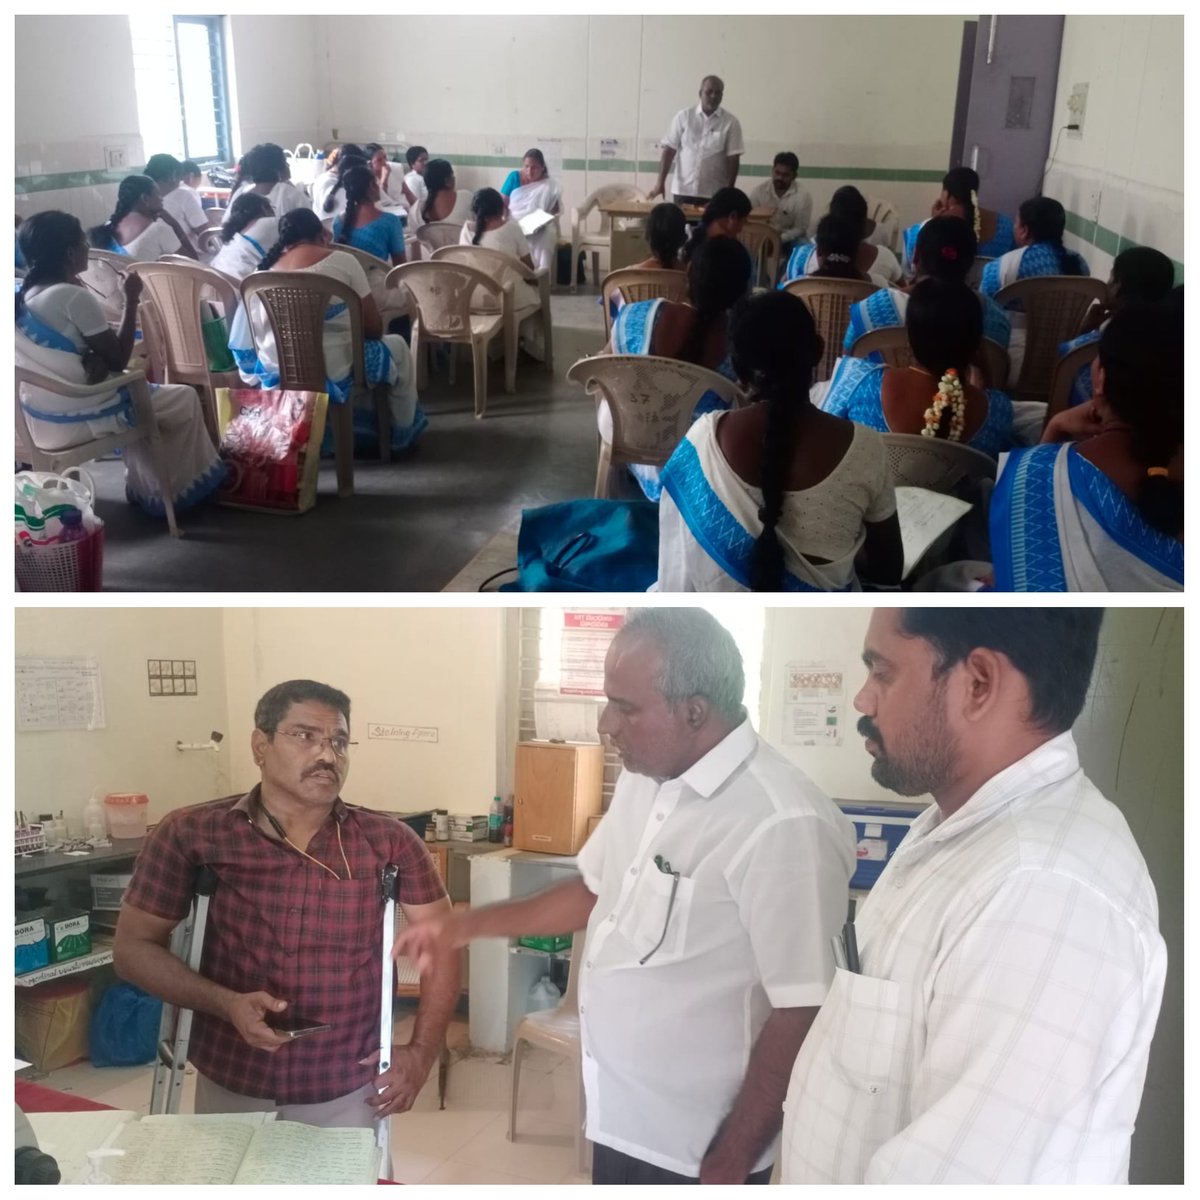 🙏Today attended asha day meeting@ufwc kothagudem, sujathanagar & julurupadu of julurupadu tbu,interacted with MO's,paramedical team,mlhps,Lab technicians,tb nodal persons &pharmacists.Explained the importance of TPT,tb mukt panchayath&presumptive tb testing.
*Yes we can end tb*